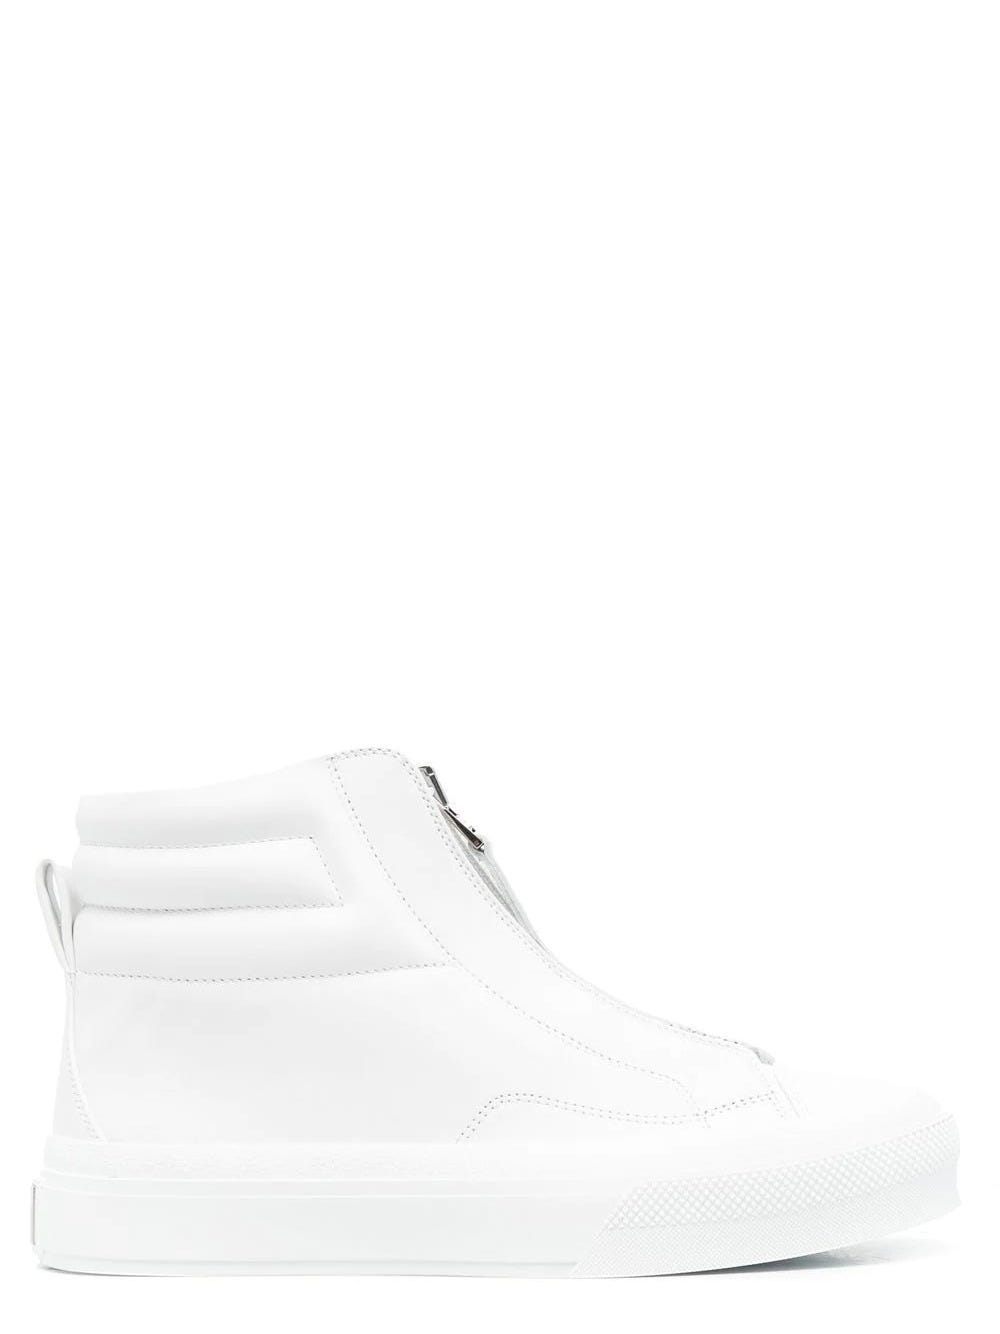 GIVENCHY WHITE HIGH TOP SNEAKERS WITH ZIPPER